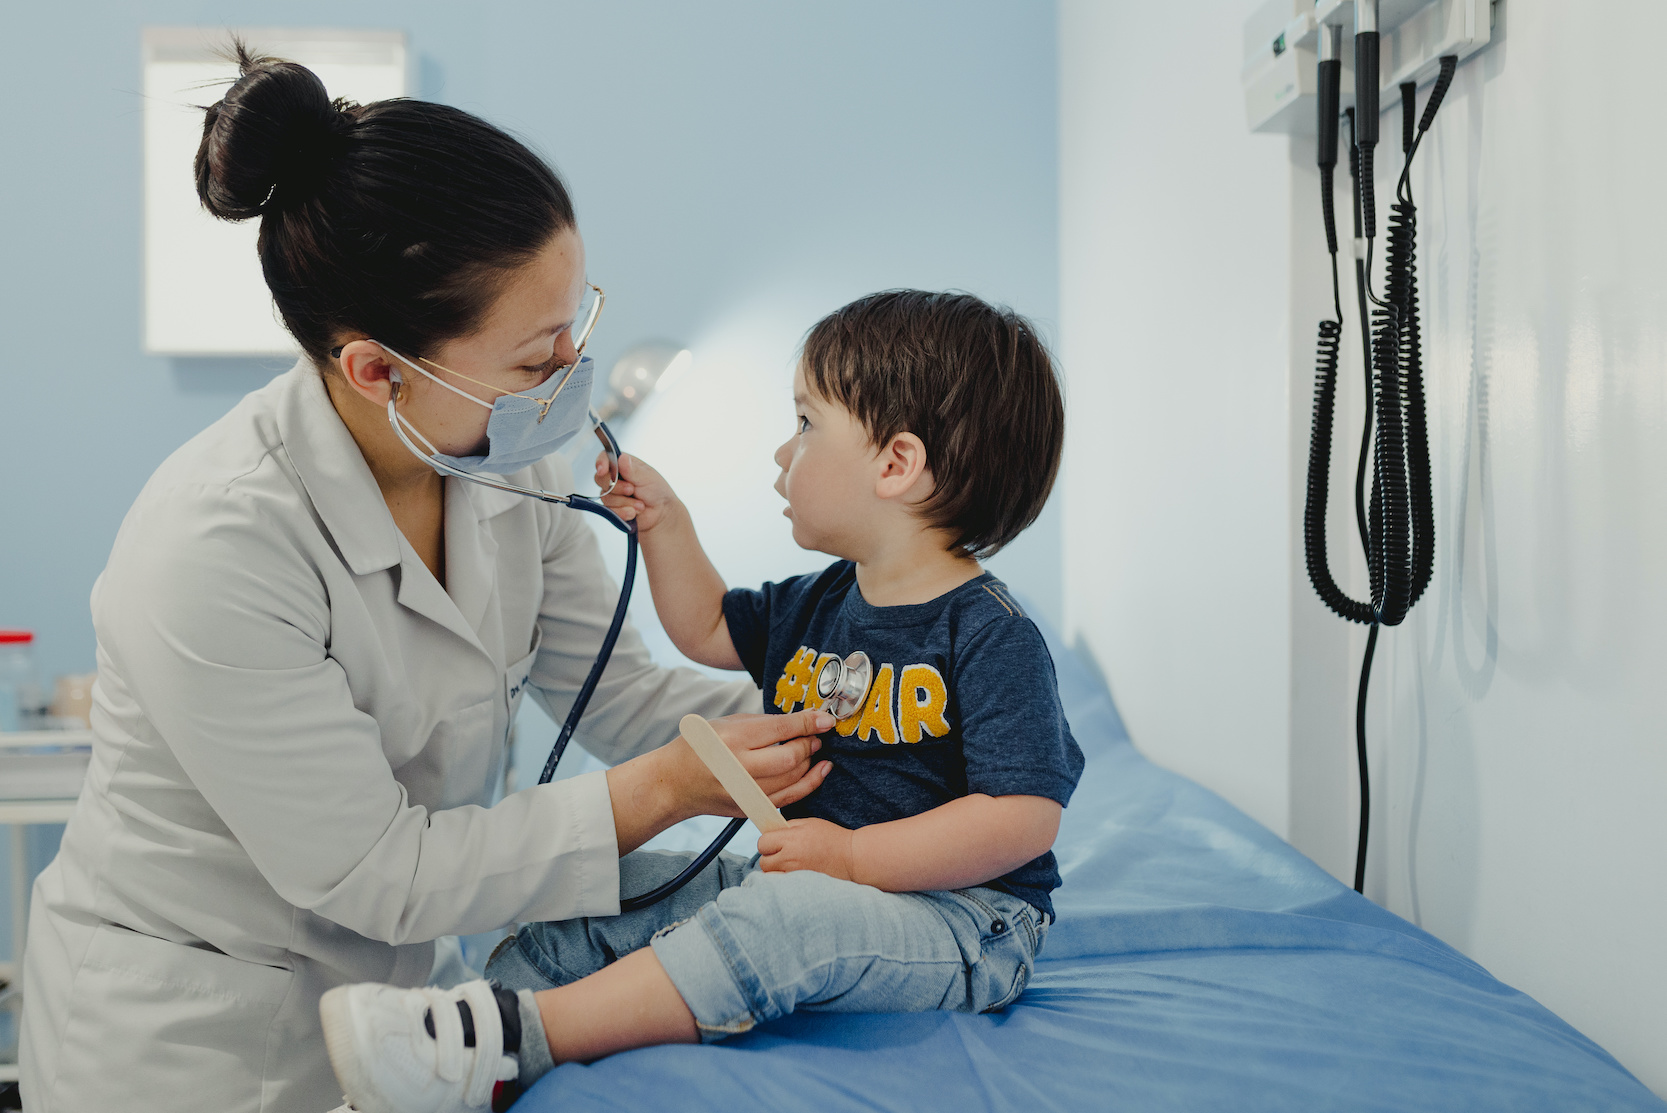 Dr. pediatrician with attending toddler